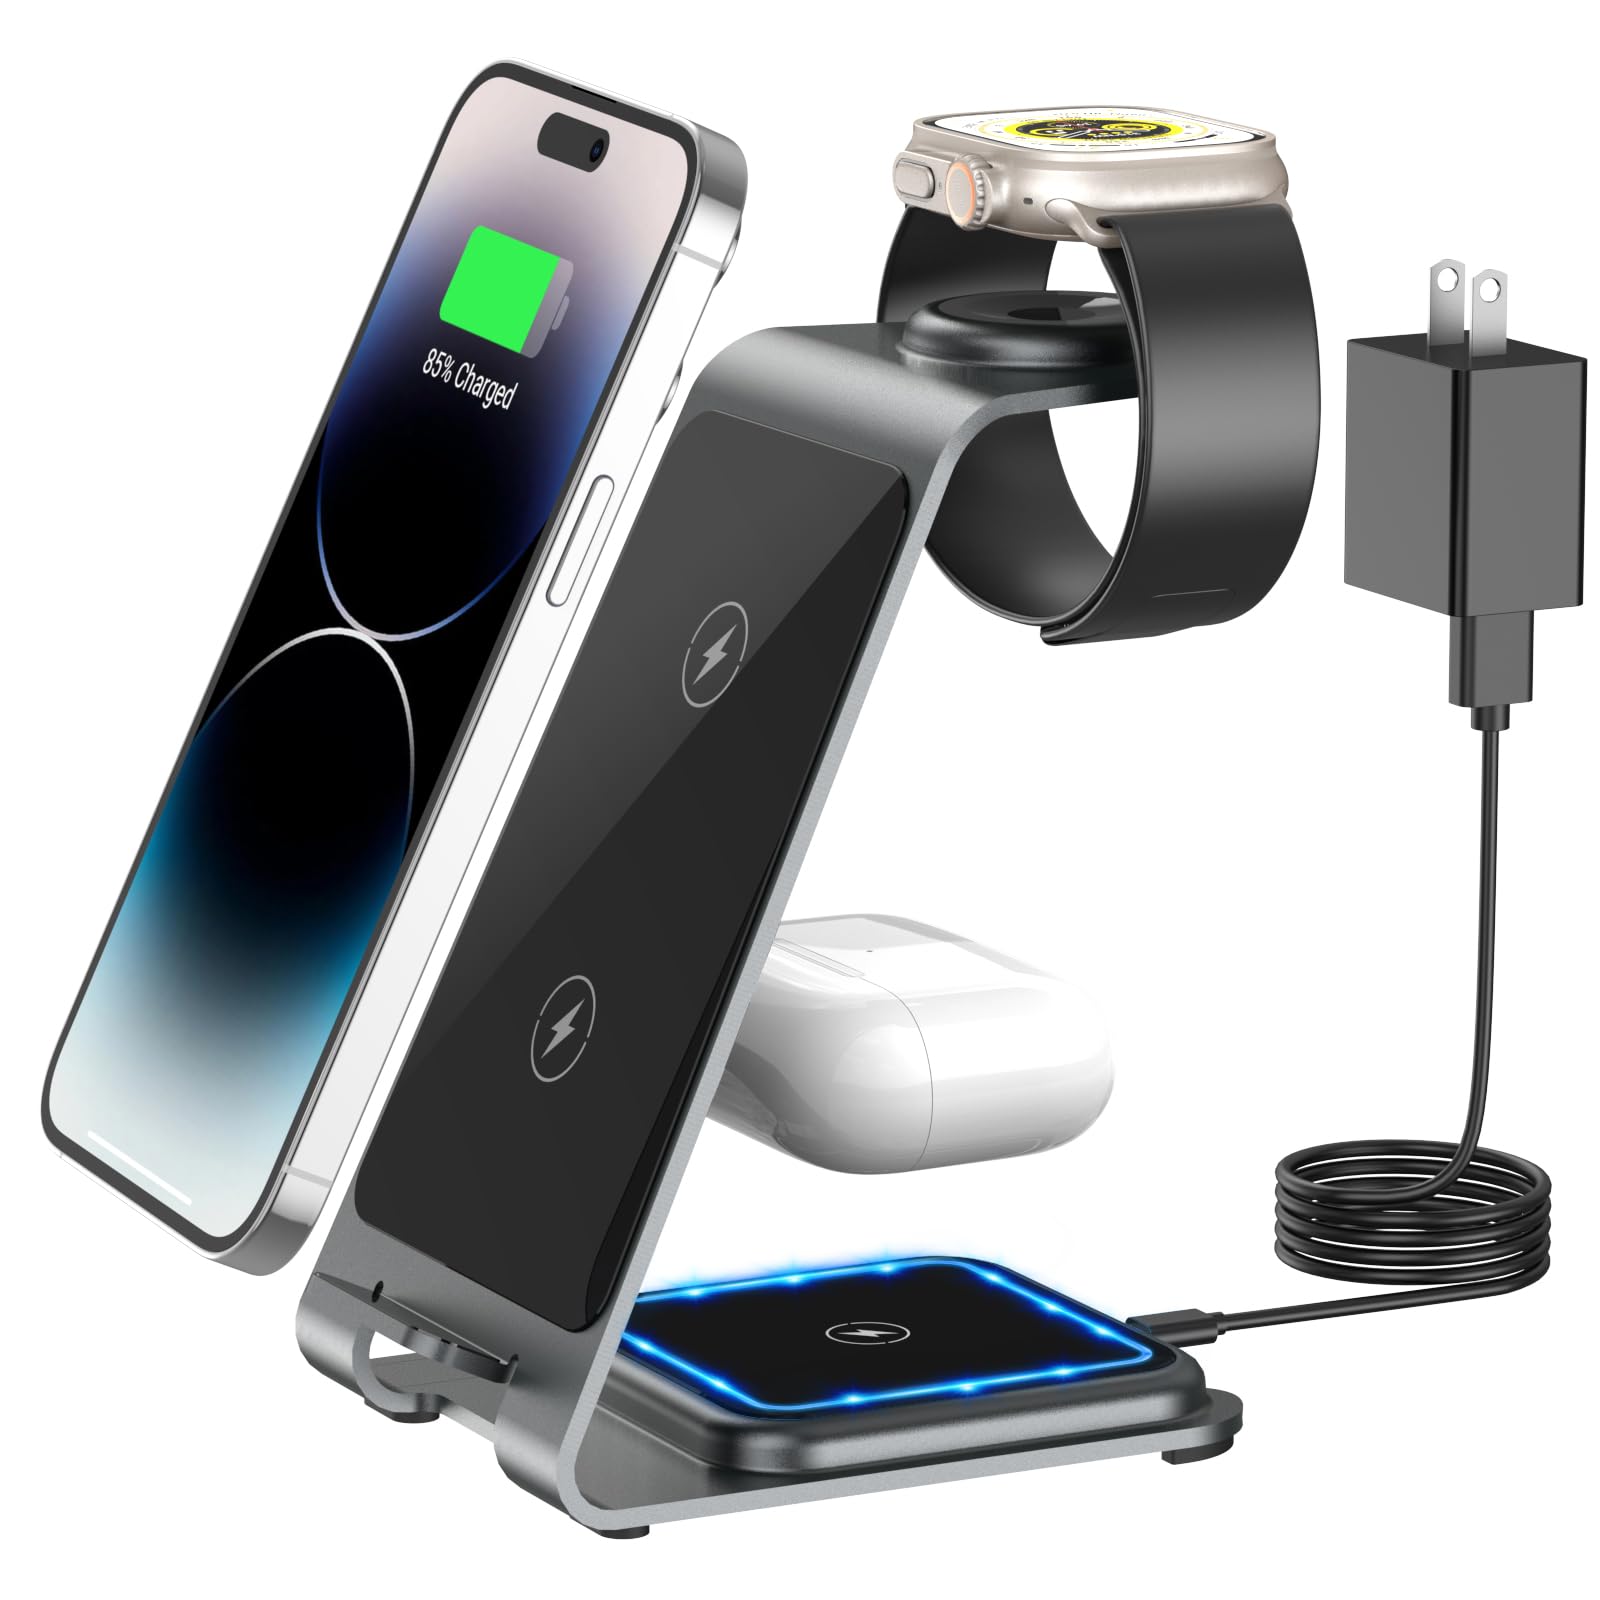 Wireless Charging Station, RR SPORTS 3 in 1 Wireless Charger, Aluminum Alloy Charging Dock for iPhone 14/13/12/11 Pro Max/X/Xs Max, iWatch Series 8/7/6/SE/5/4/3/2, AirPods Pro 2/Pro/3/2 (Grey)